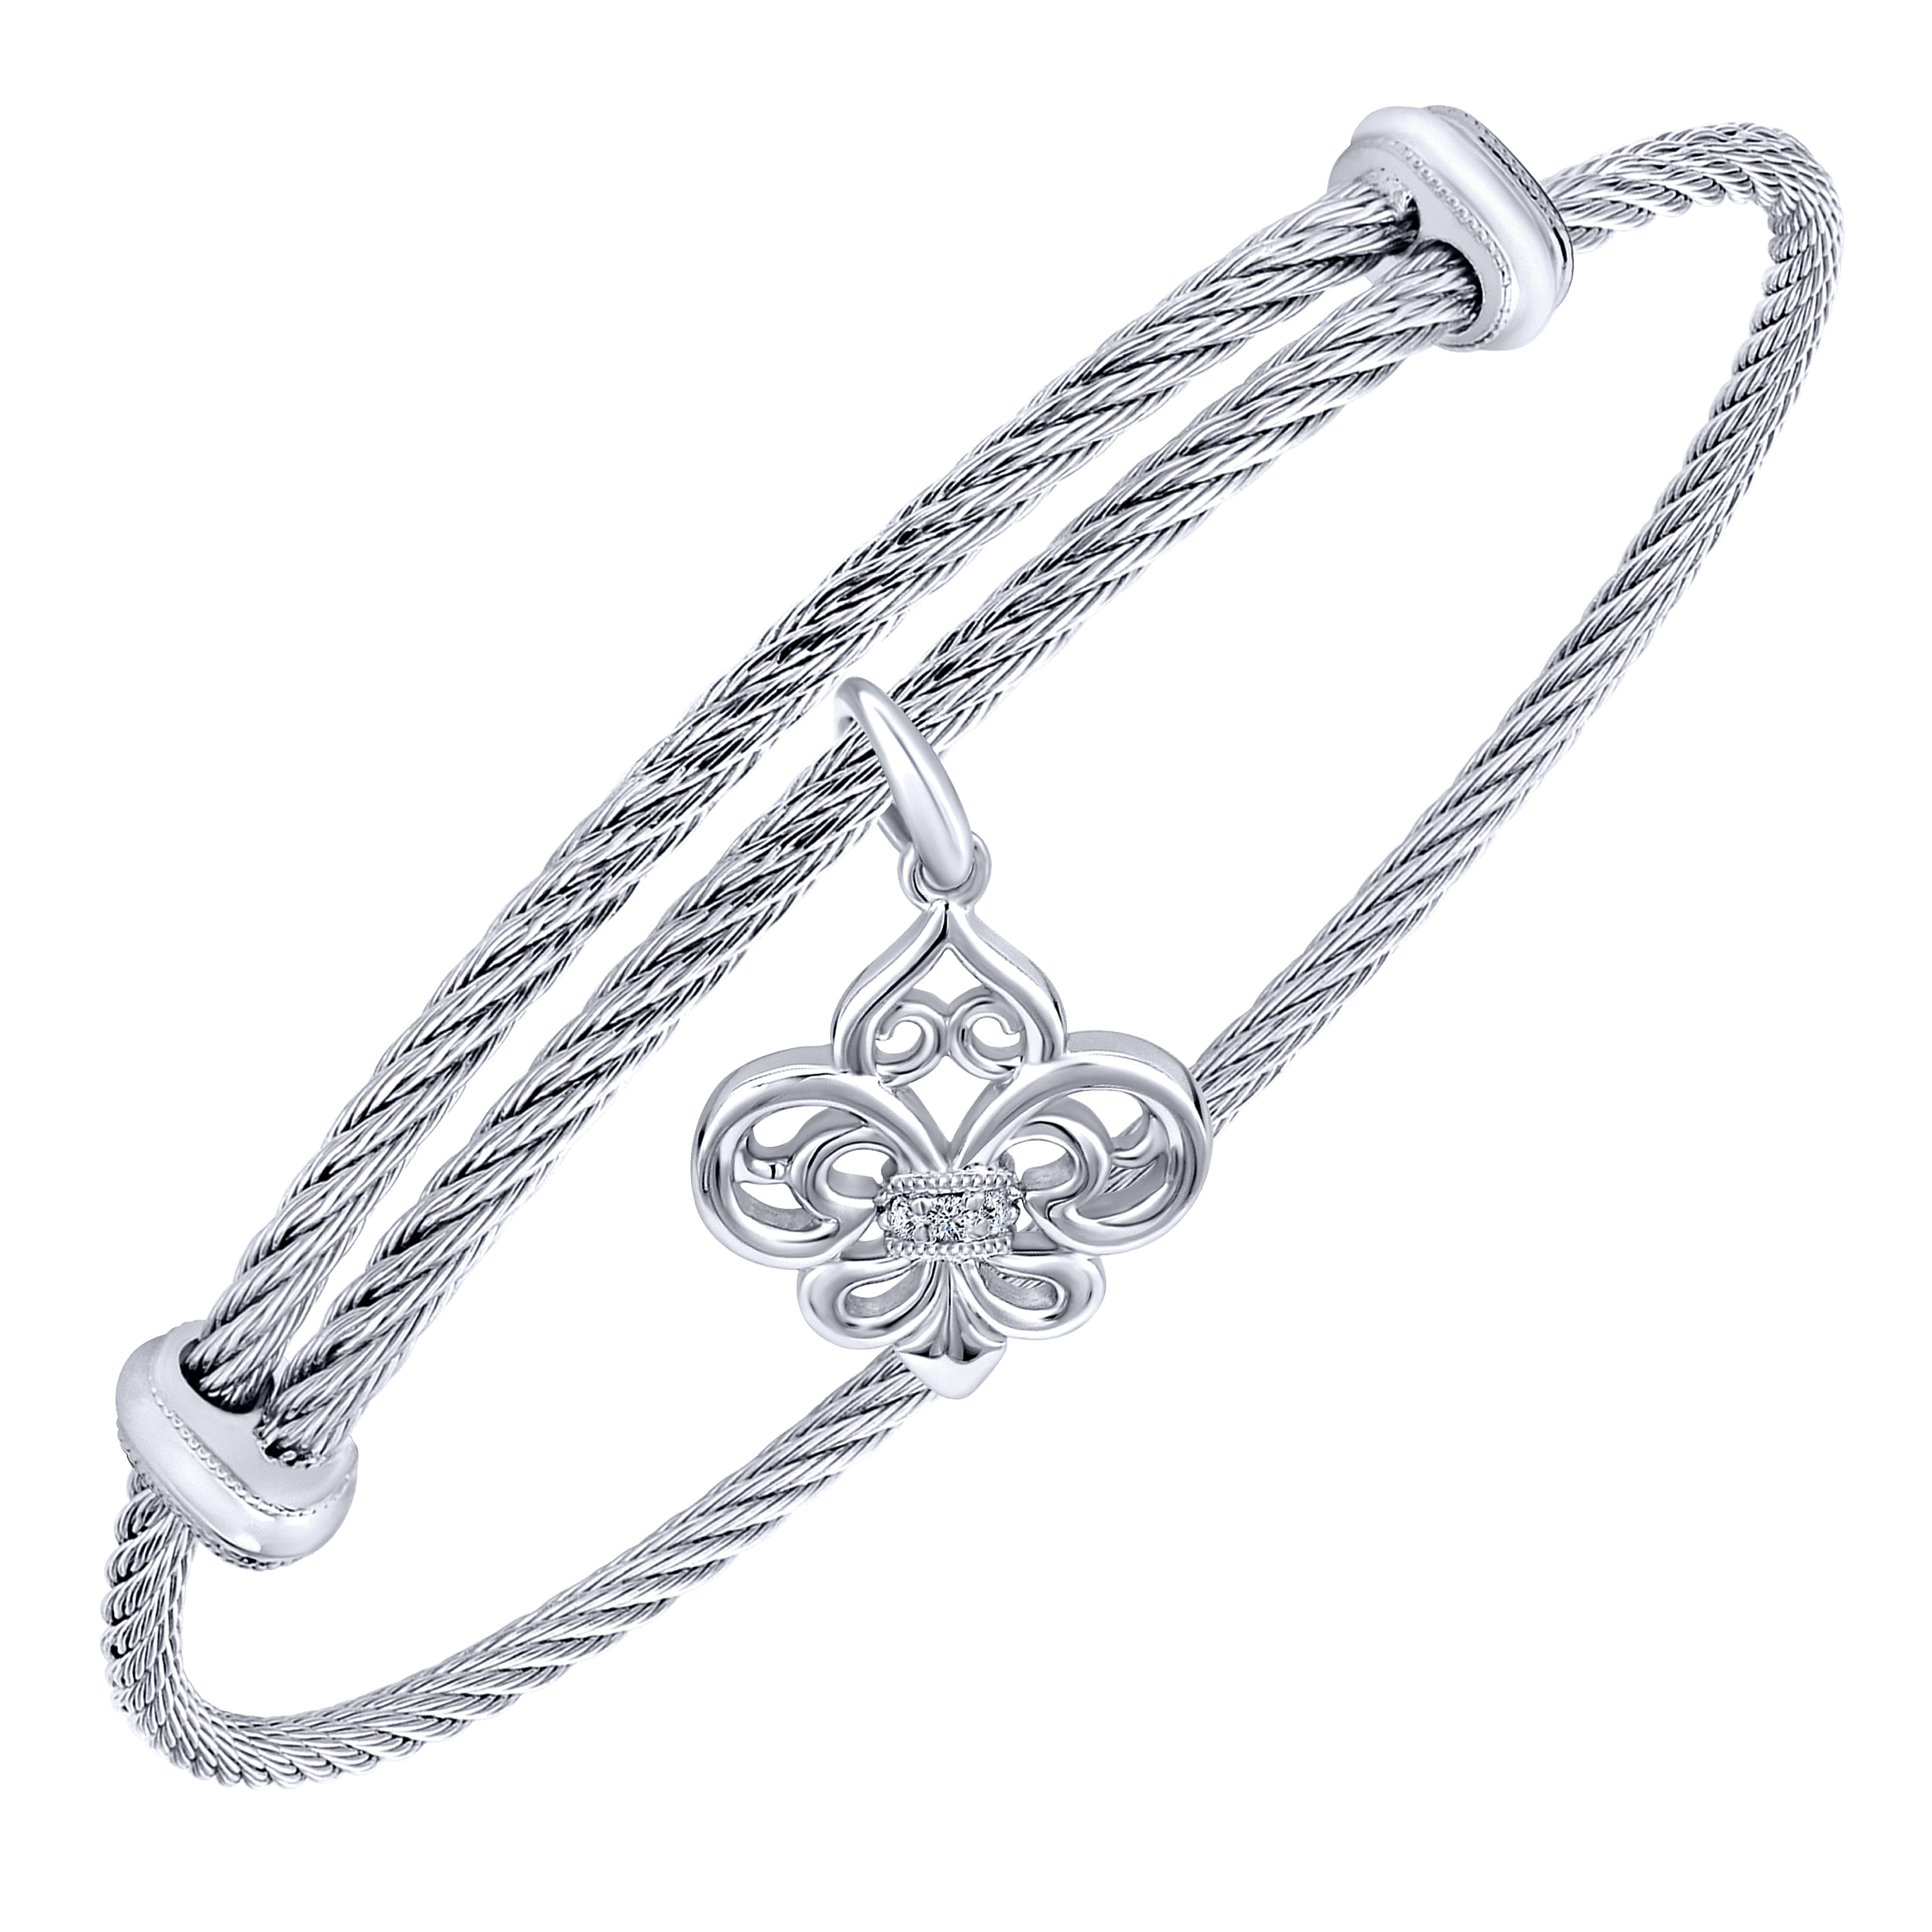 Adjustable Twisted Cable Stainless Steel Bangle with Sterling Silver Diamond Fleur de Lis Charm